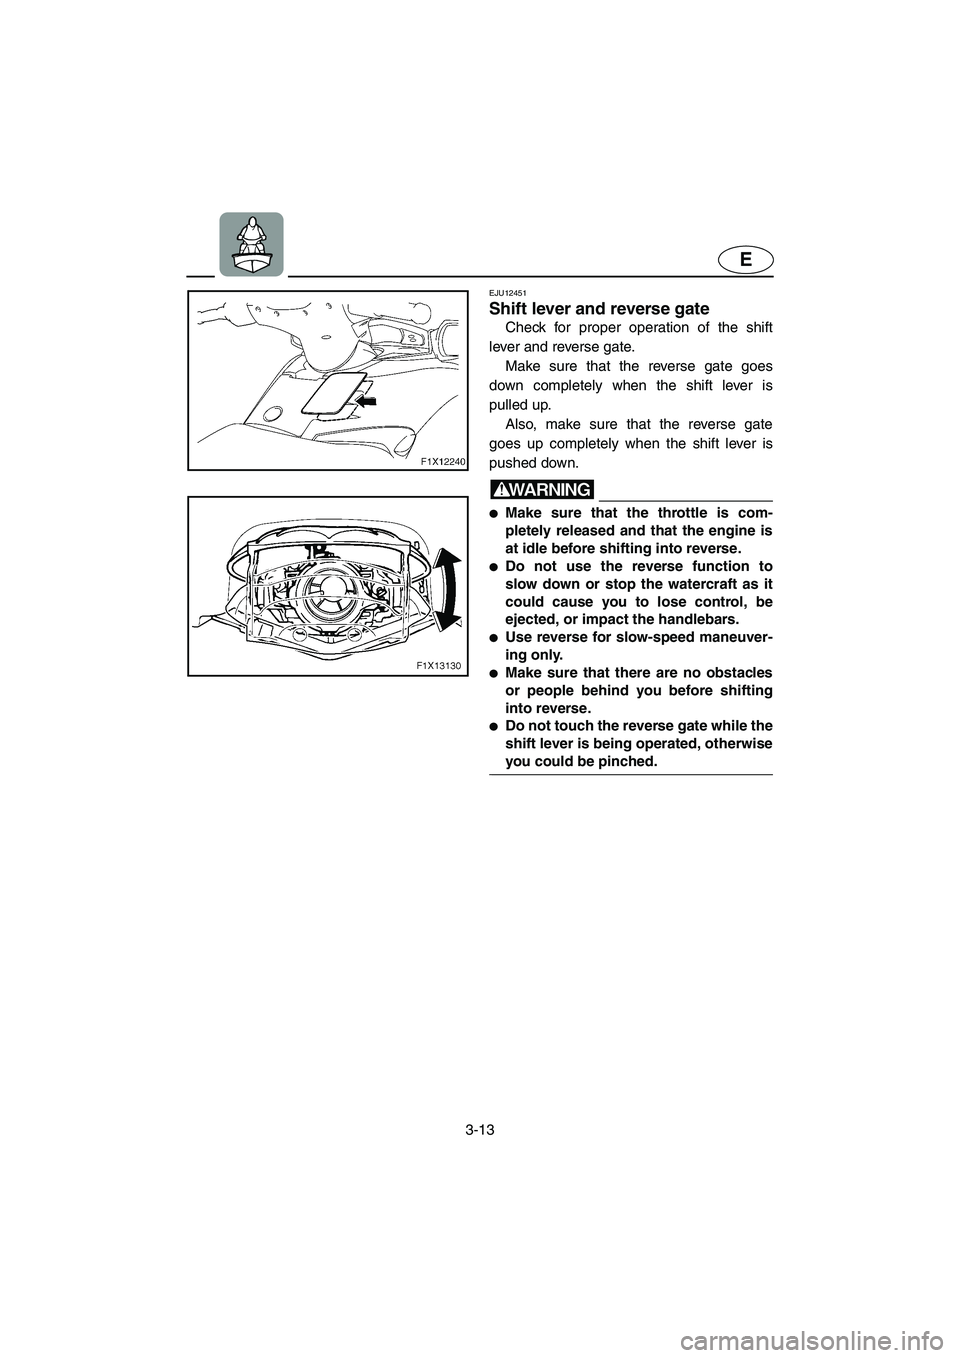 YAMAHA FX CRUISER 2006 Repair Manual 3-13
E
EJU12451 
Shift lever and reverse gate 
Check for proper operation of the shift
lever and reverse gate. 
Make sure that the reverse gate goes
down completely when the shift lever is
pulled up. 